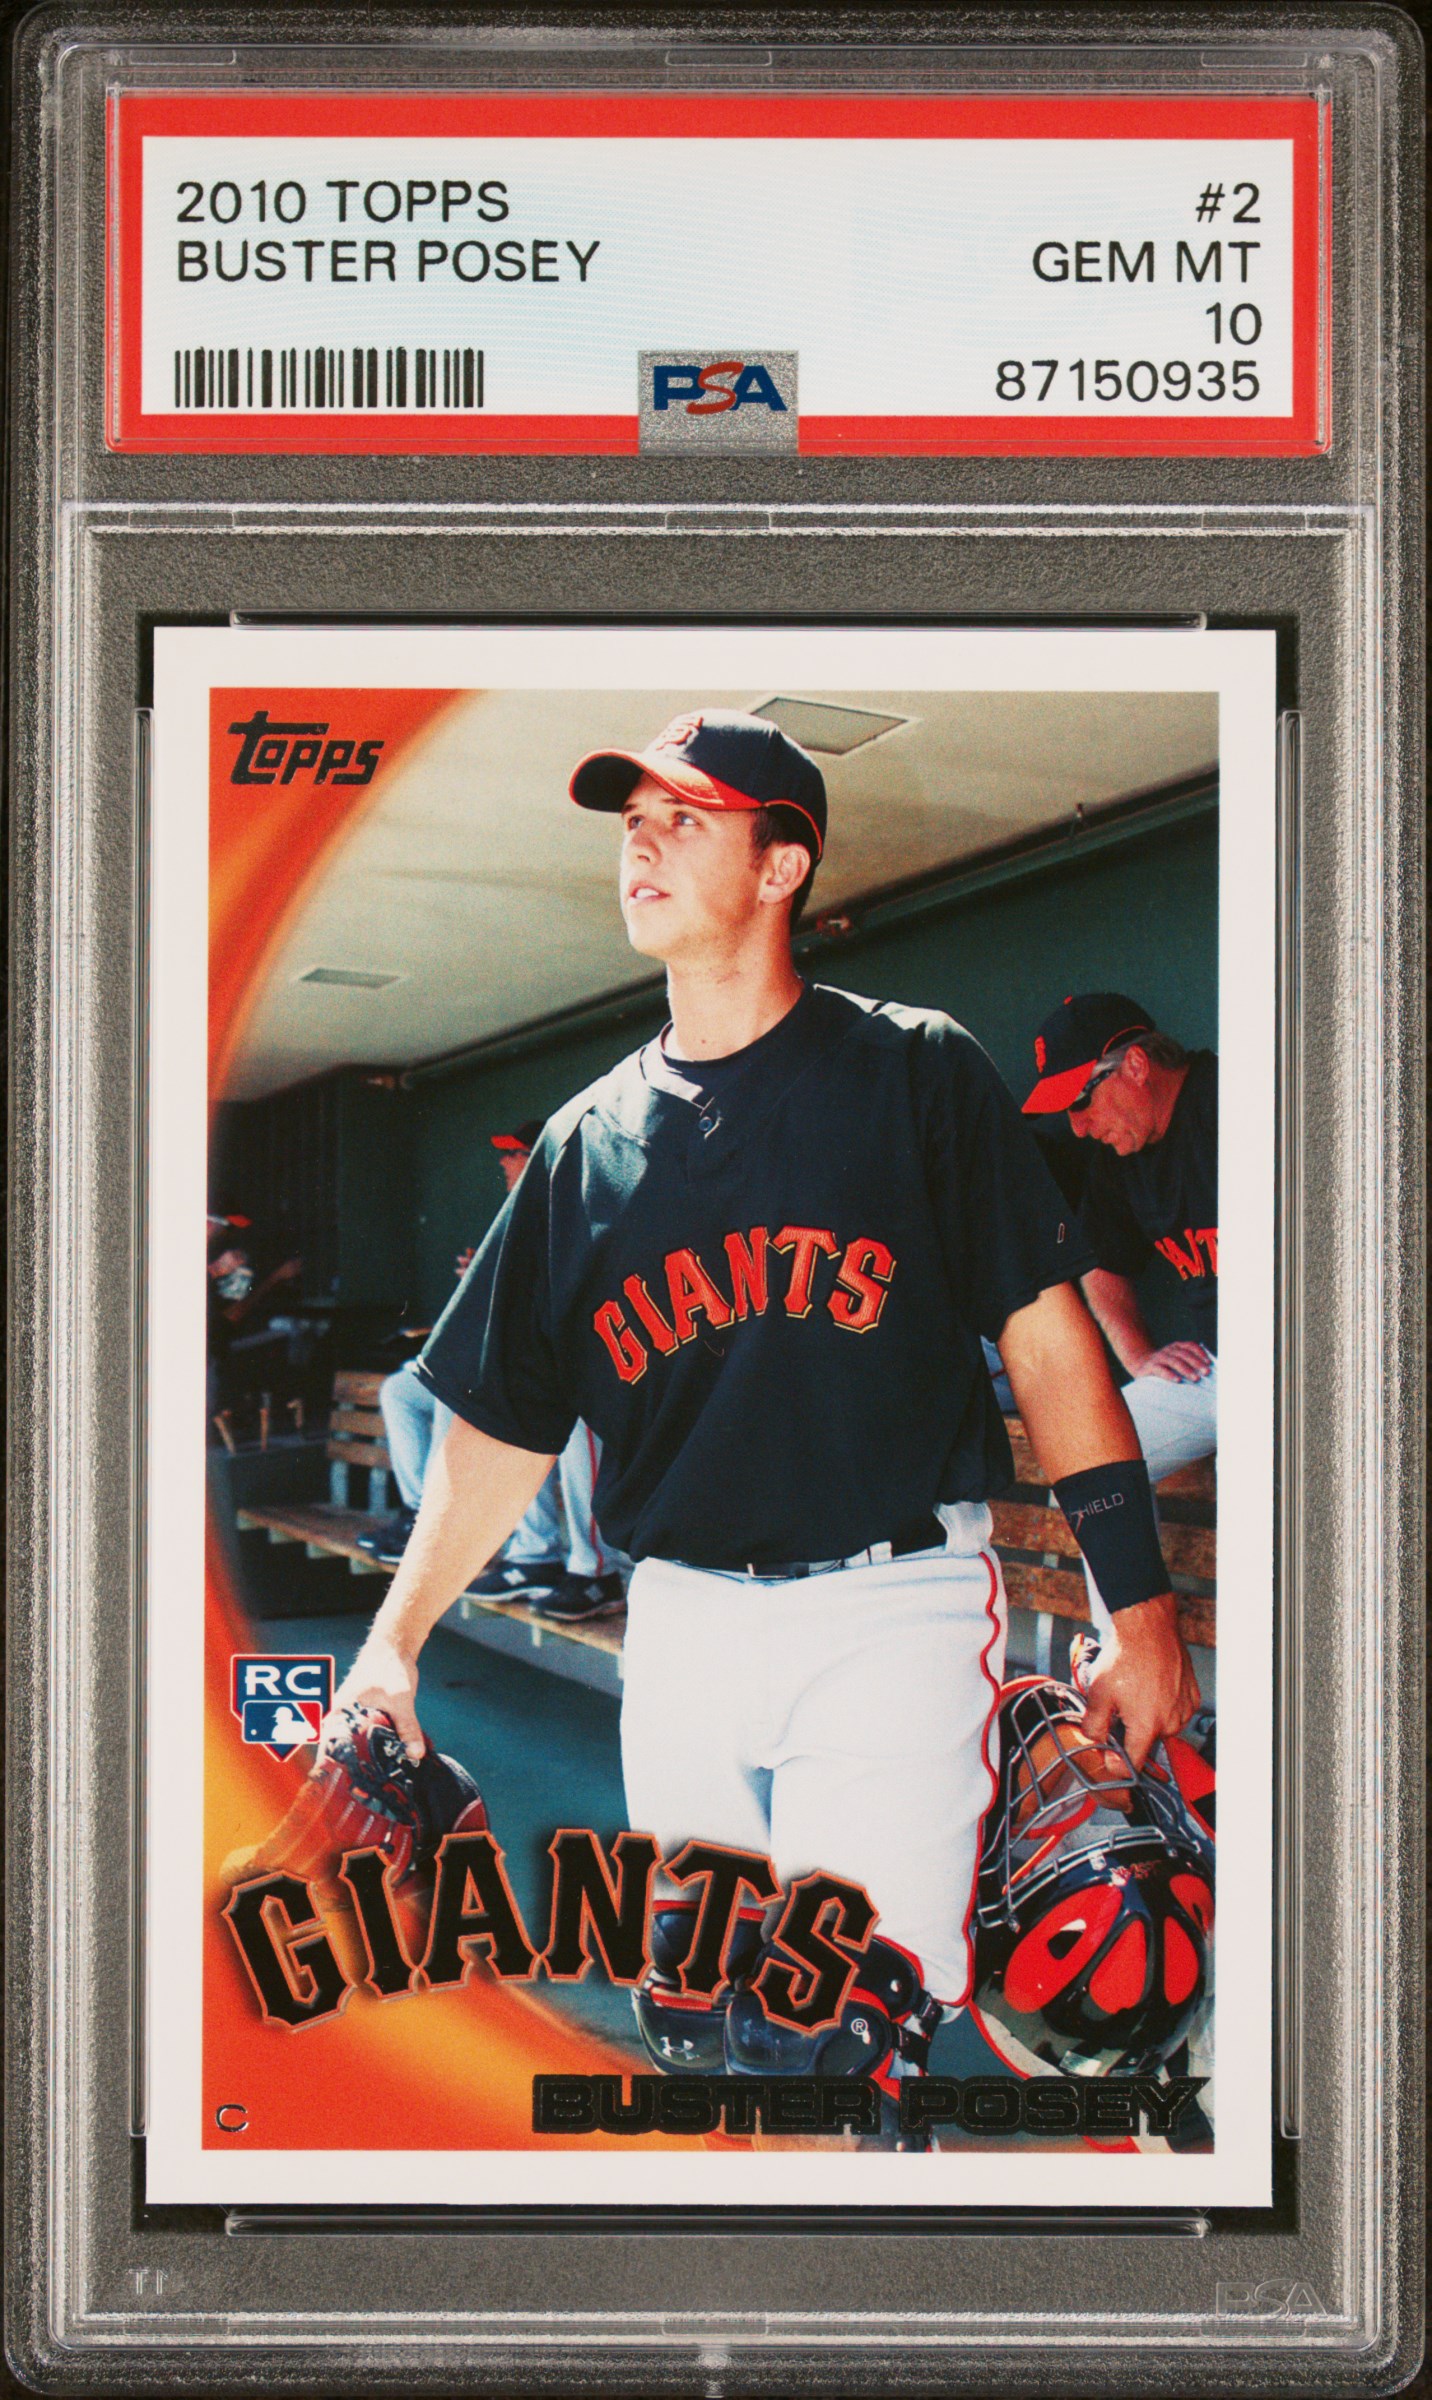 2010 Topps #2 Buster Posey Rookie Card – PSA GEM MT 10